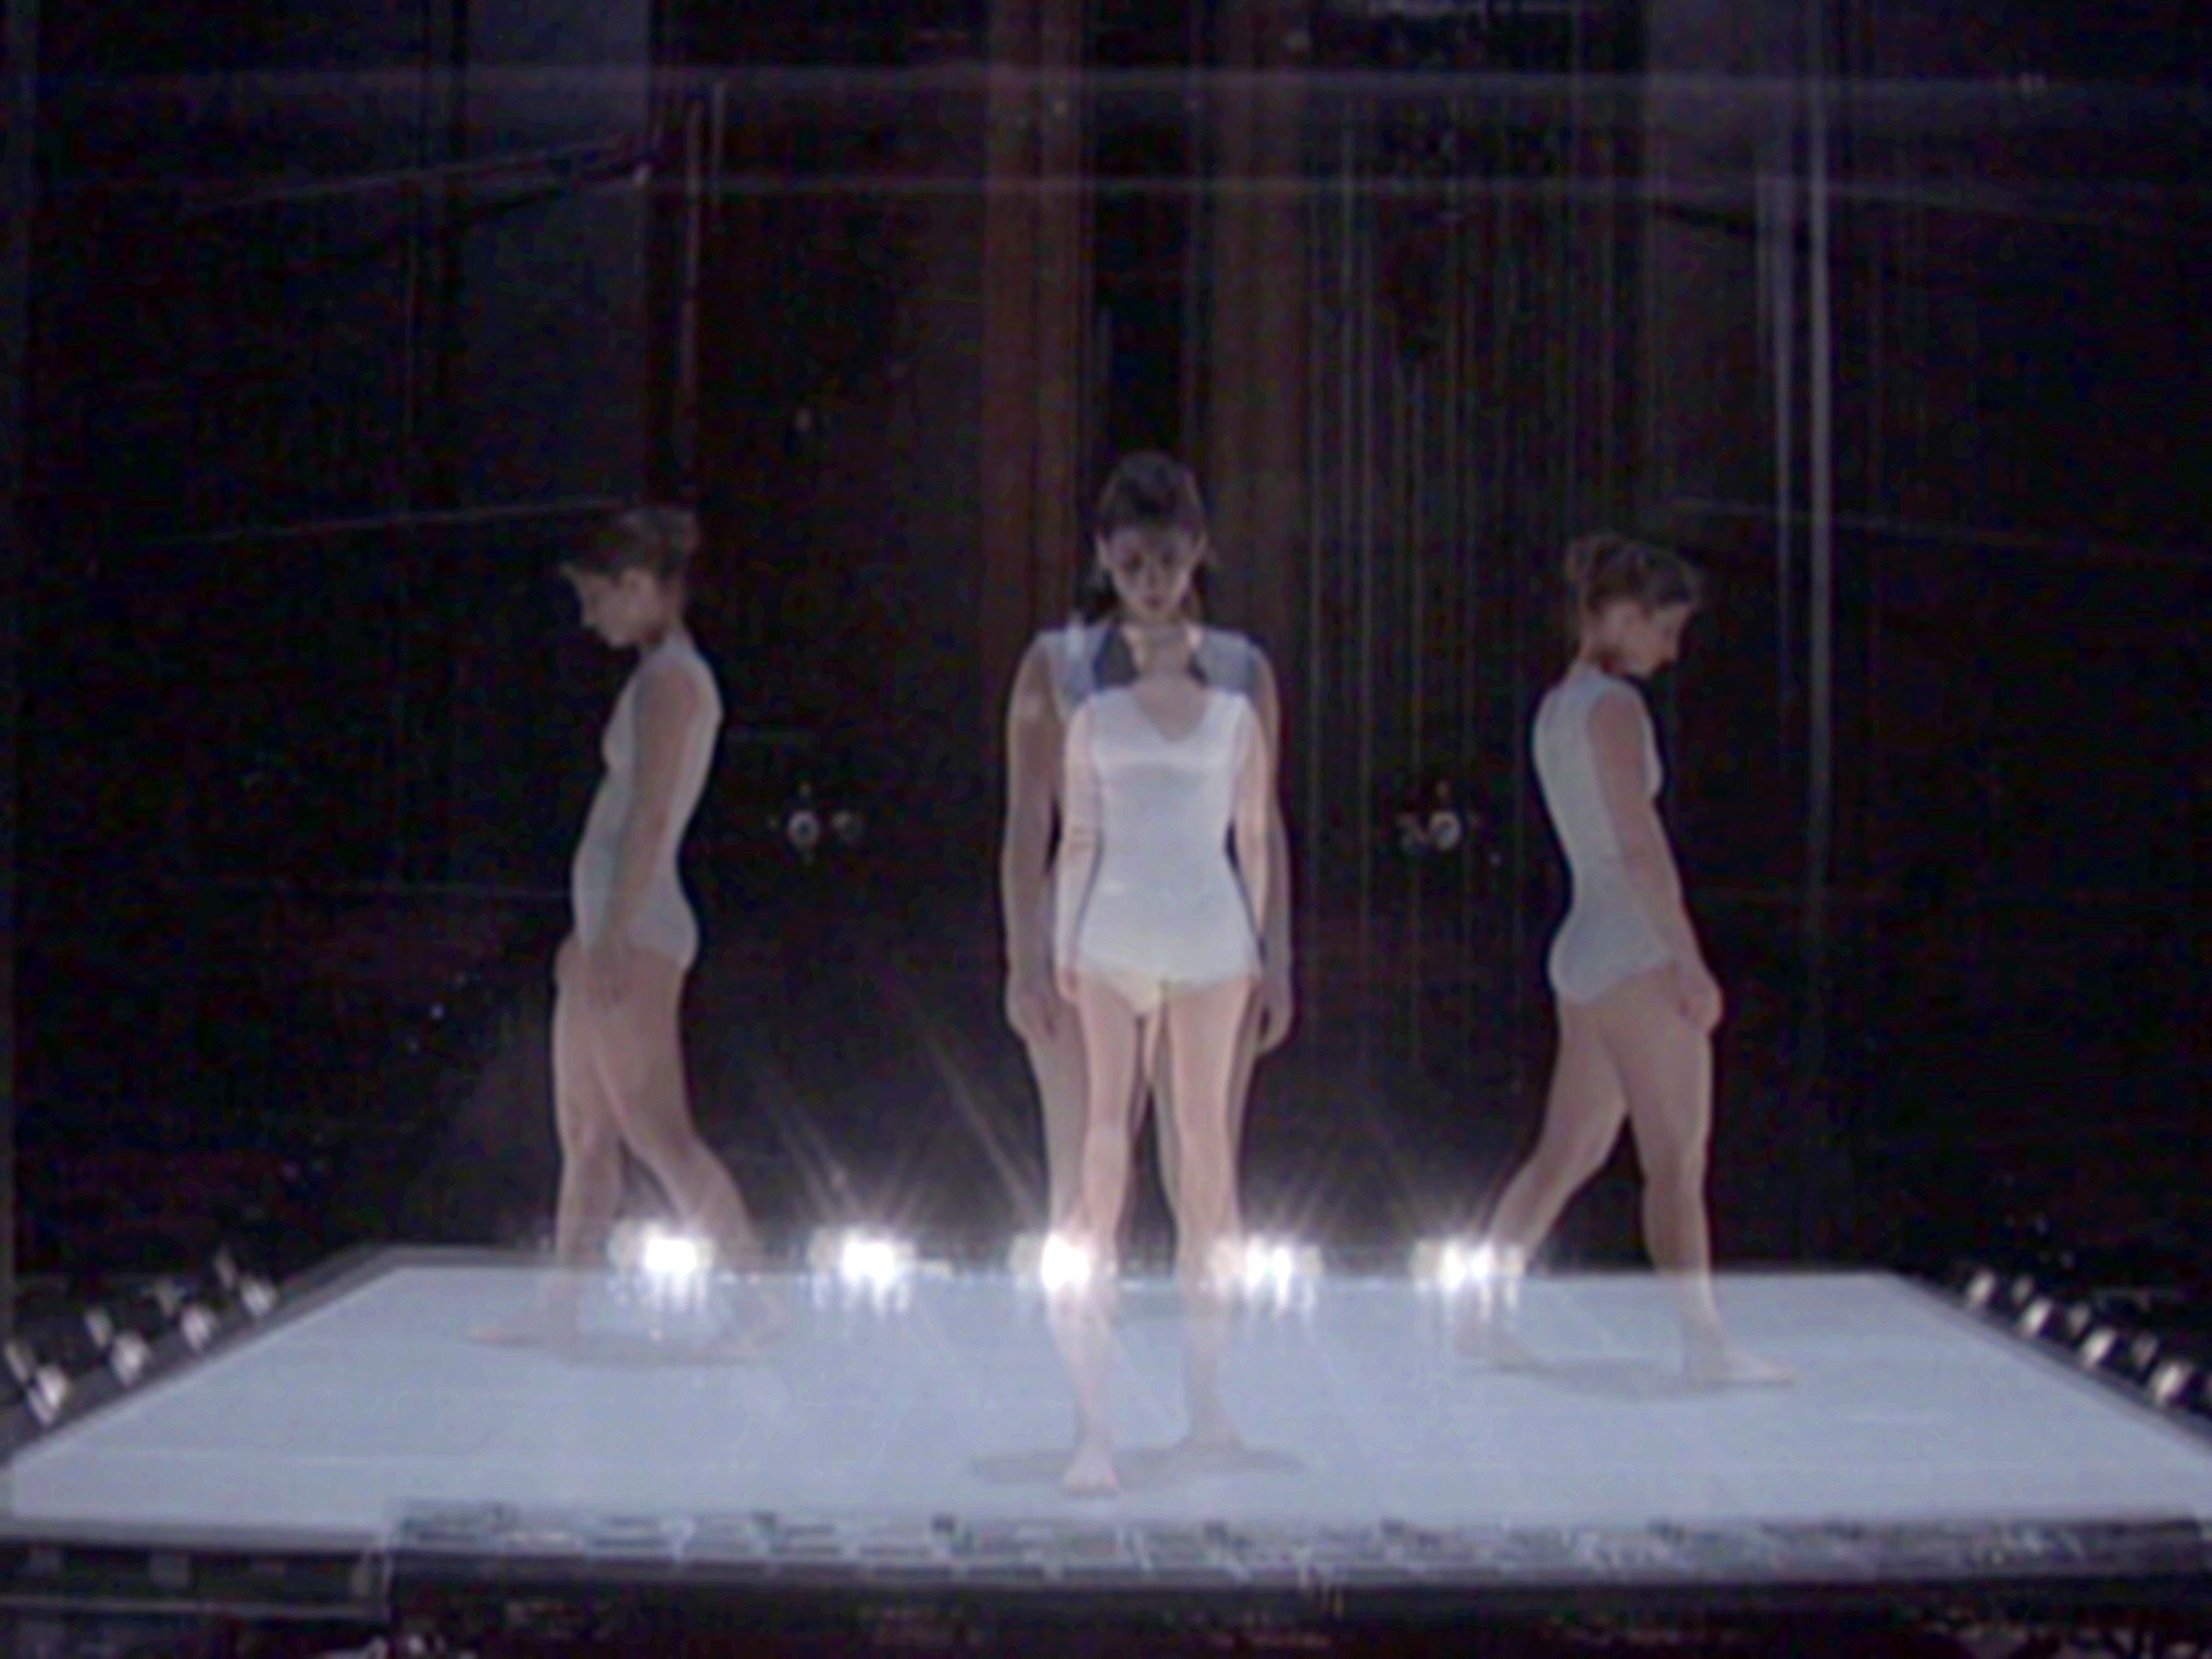 Four images of a performer in a white leotard stepping in each of the four cardinal directions on a square platform stage.